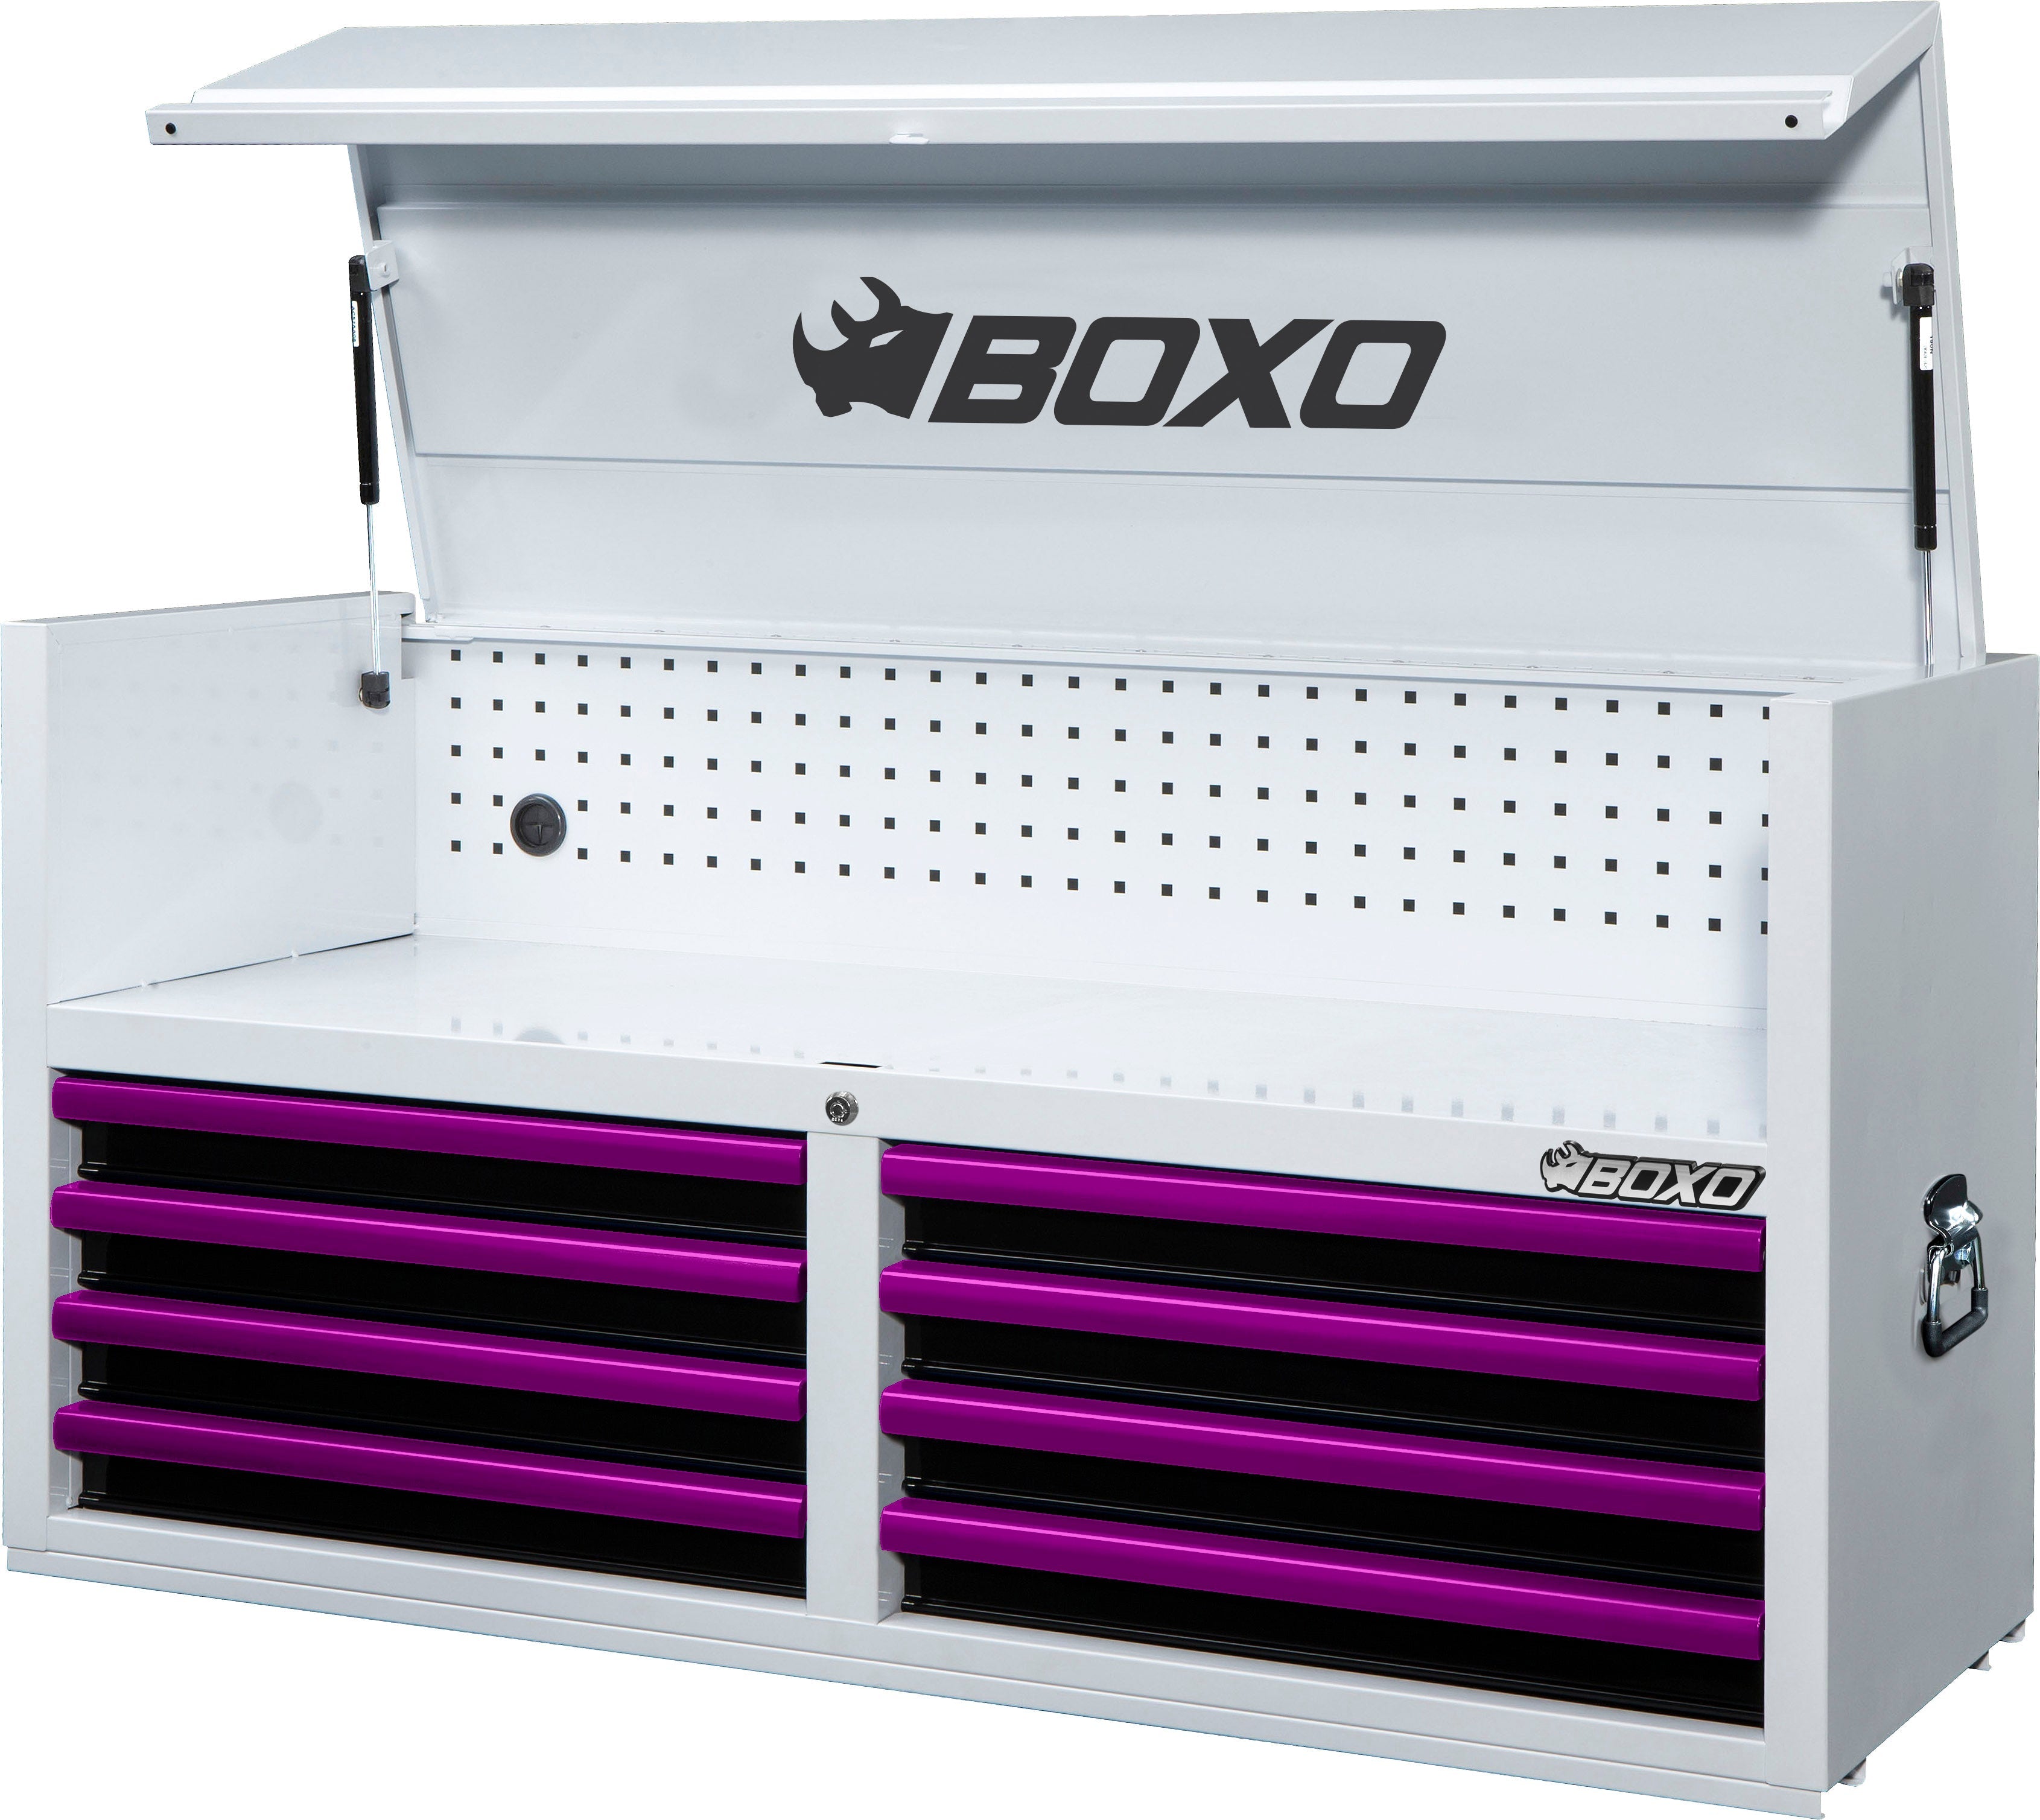 BOXO 53" 8 Drawer Top Box with Drawer Trim Pack - White Body & Trim Colour Options